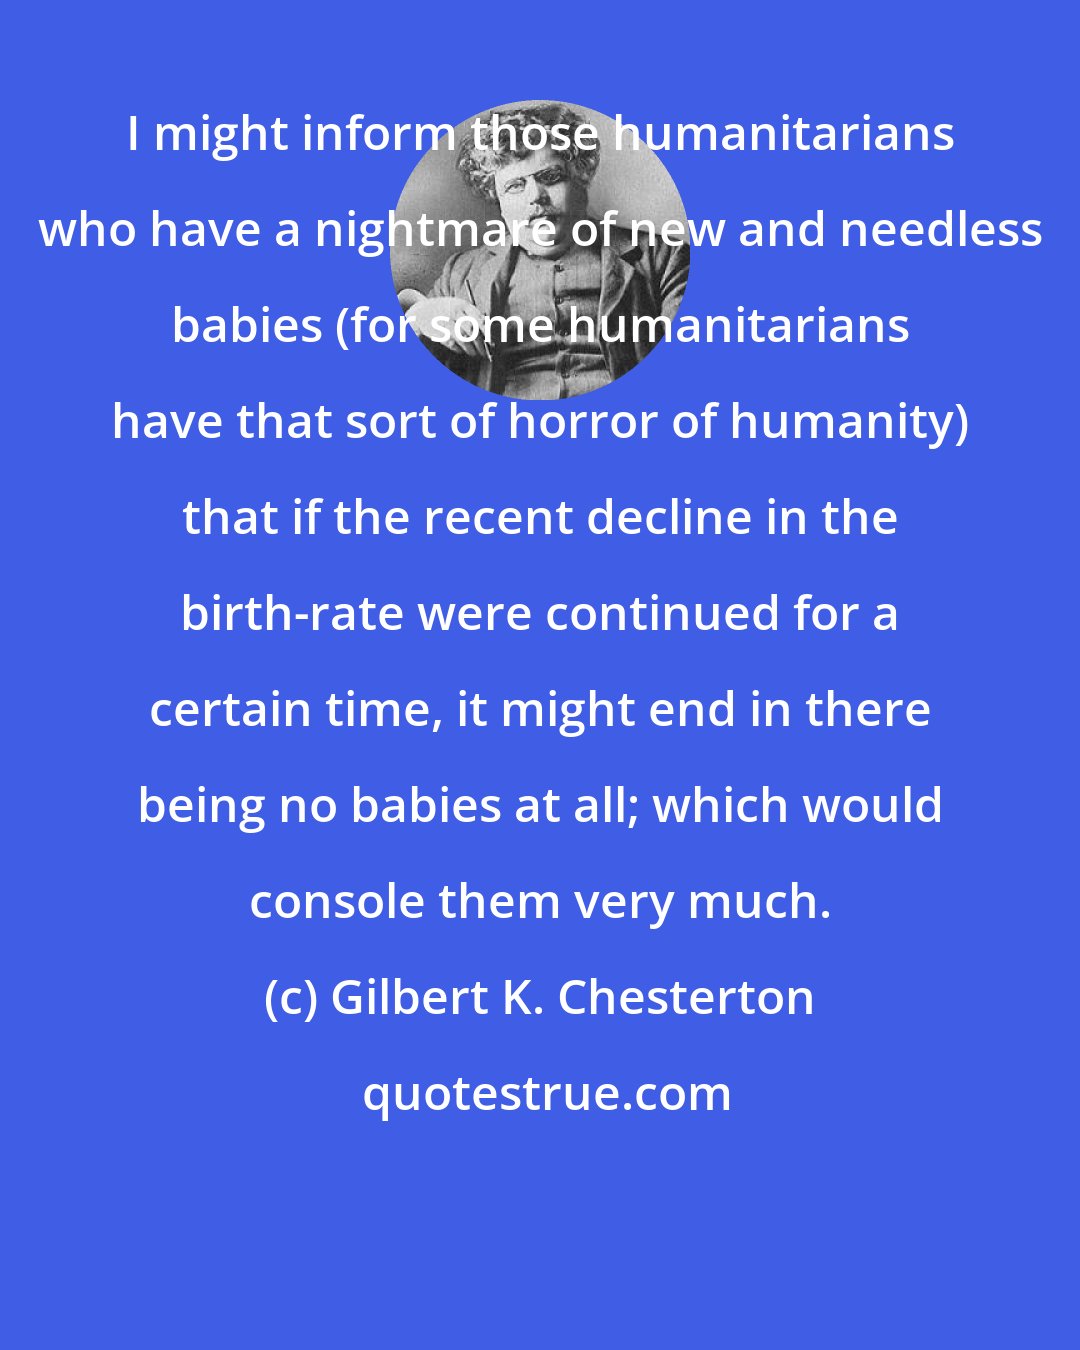 Gilbert K. Chesterton: I might inform those humanitarians who have a nightmare of new and needless babies (for some humanitarians have that sort of horror of humanity) that if the recent decline in the birth-rate were continued for a certain time, it might end in there being no babies at all; which would console them very much.